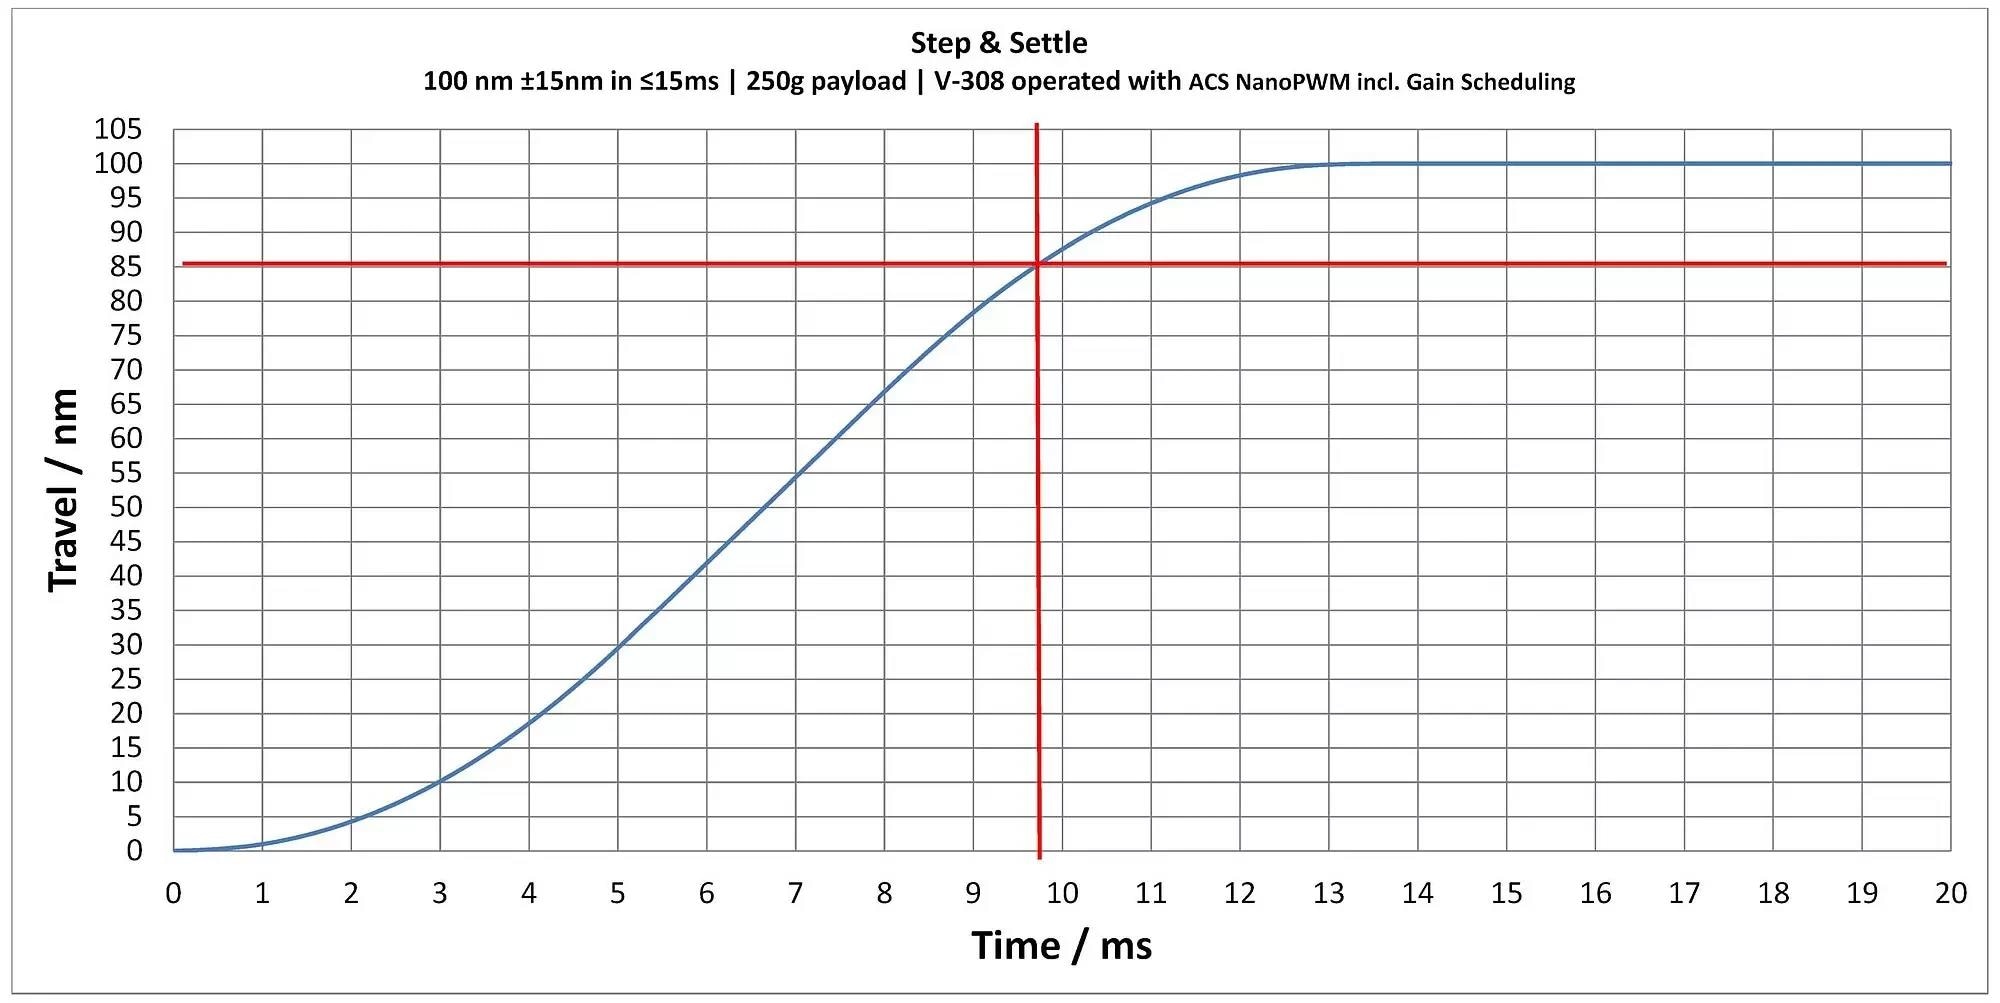 V-308 settling time with 250 g load at a step of 100 nm in an error band of +/-15 nm.